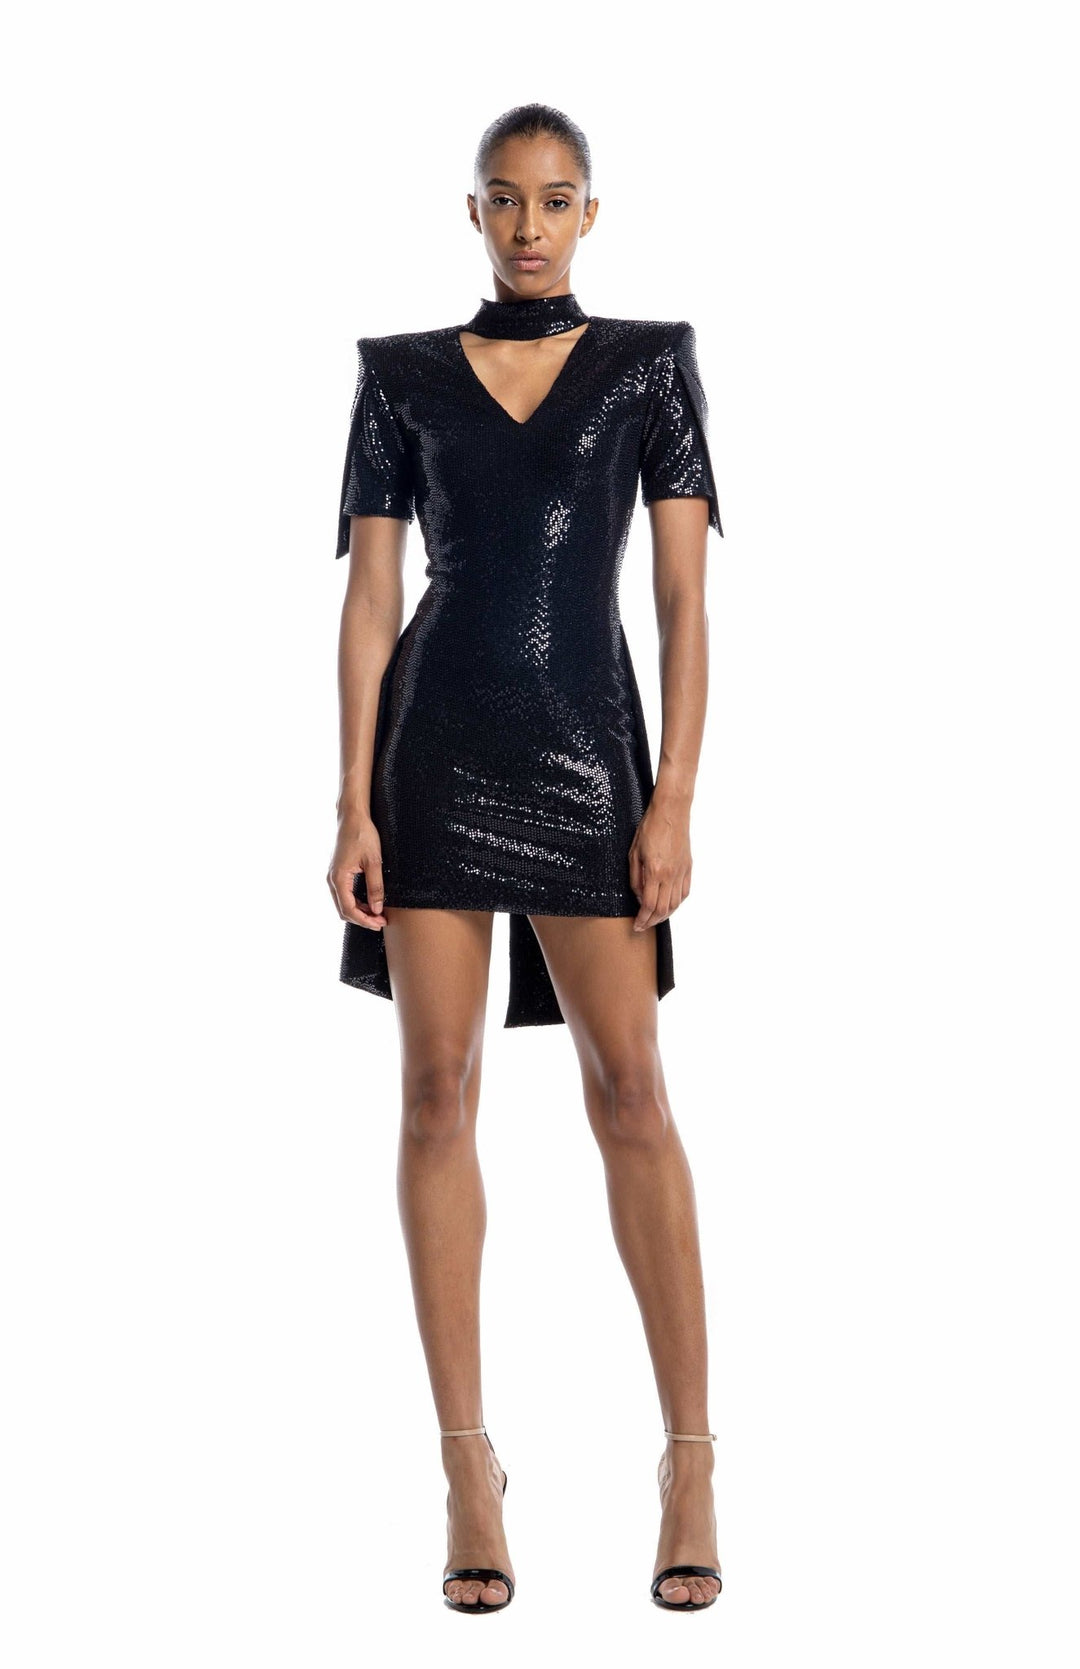 Elegant, Black short sequin dress, with short draped sleeves, high neck, and long tails